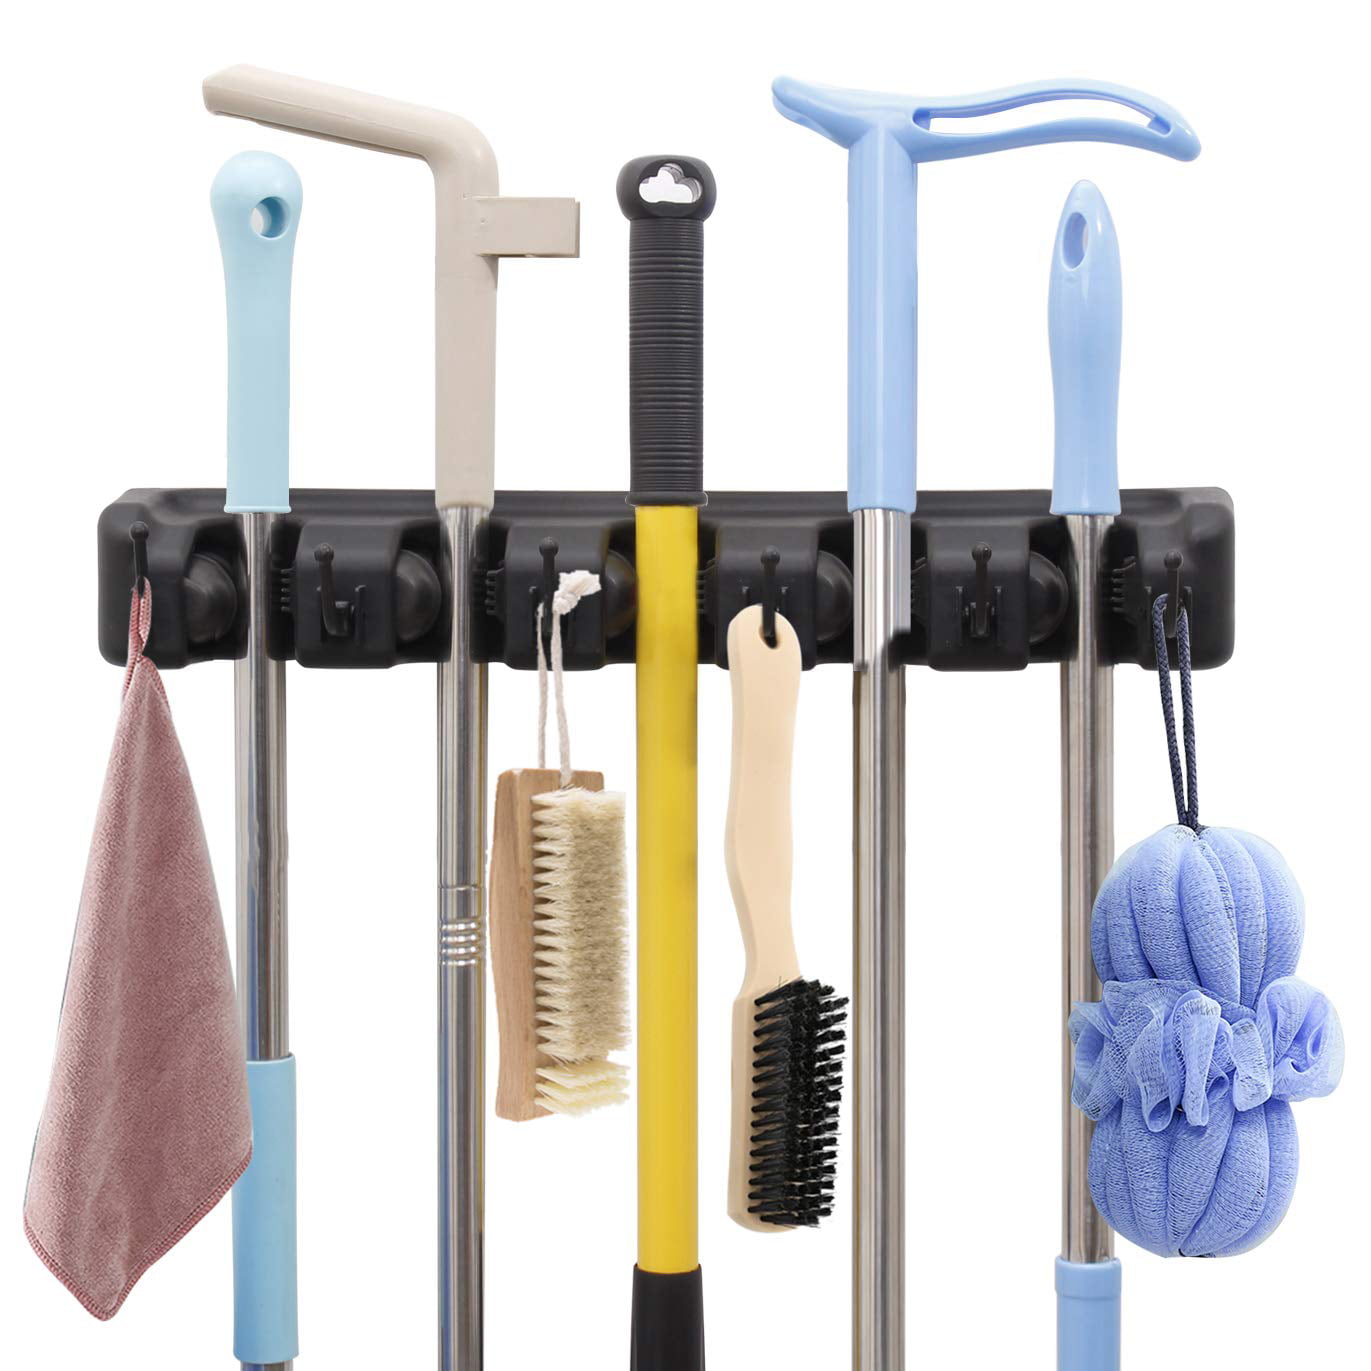 5 Position with 6 Hooks Garage Storage Holds Up to 11 Tools Garage Storage Systems Broom Organizer Wall Mount Mop and Broom Holder Storage Solutions for Broom Holders 